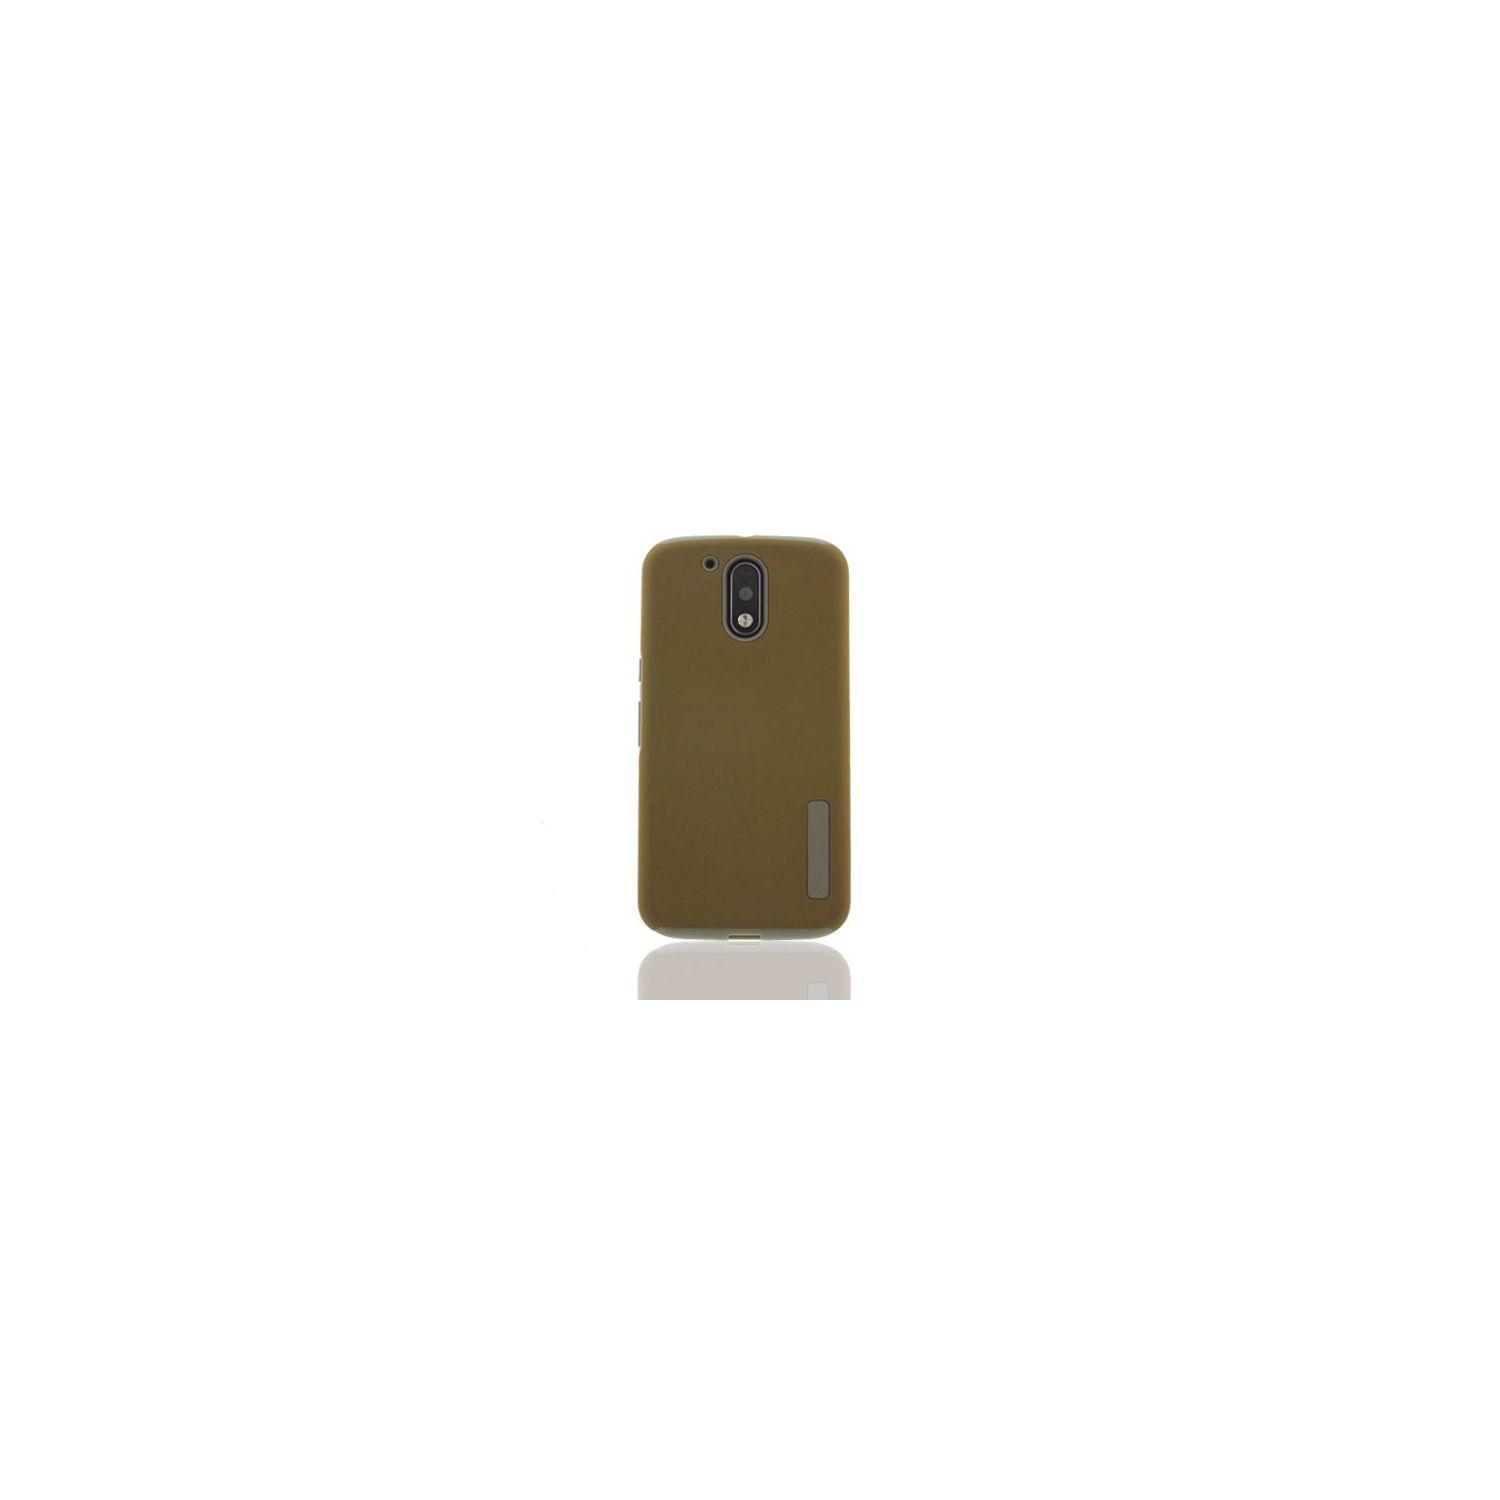 Moto G4 Play Double Layers Hard Case,w/ Smooth Back, Gold